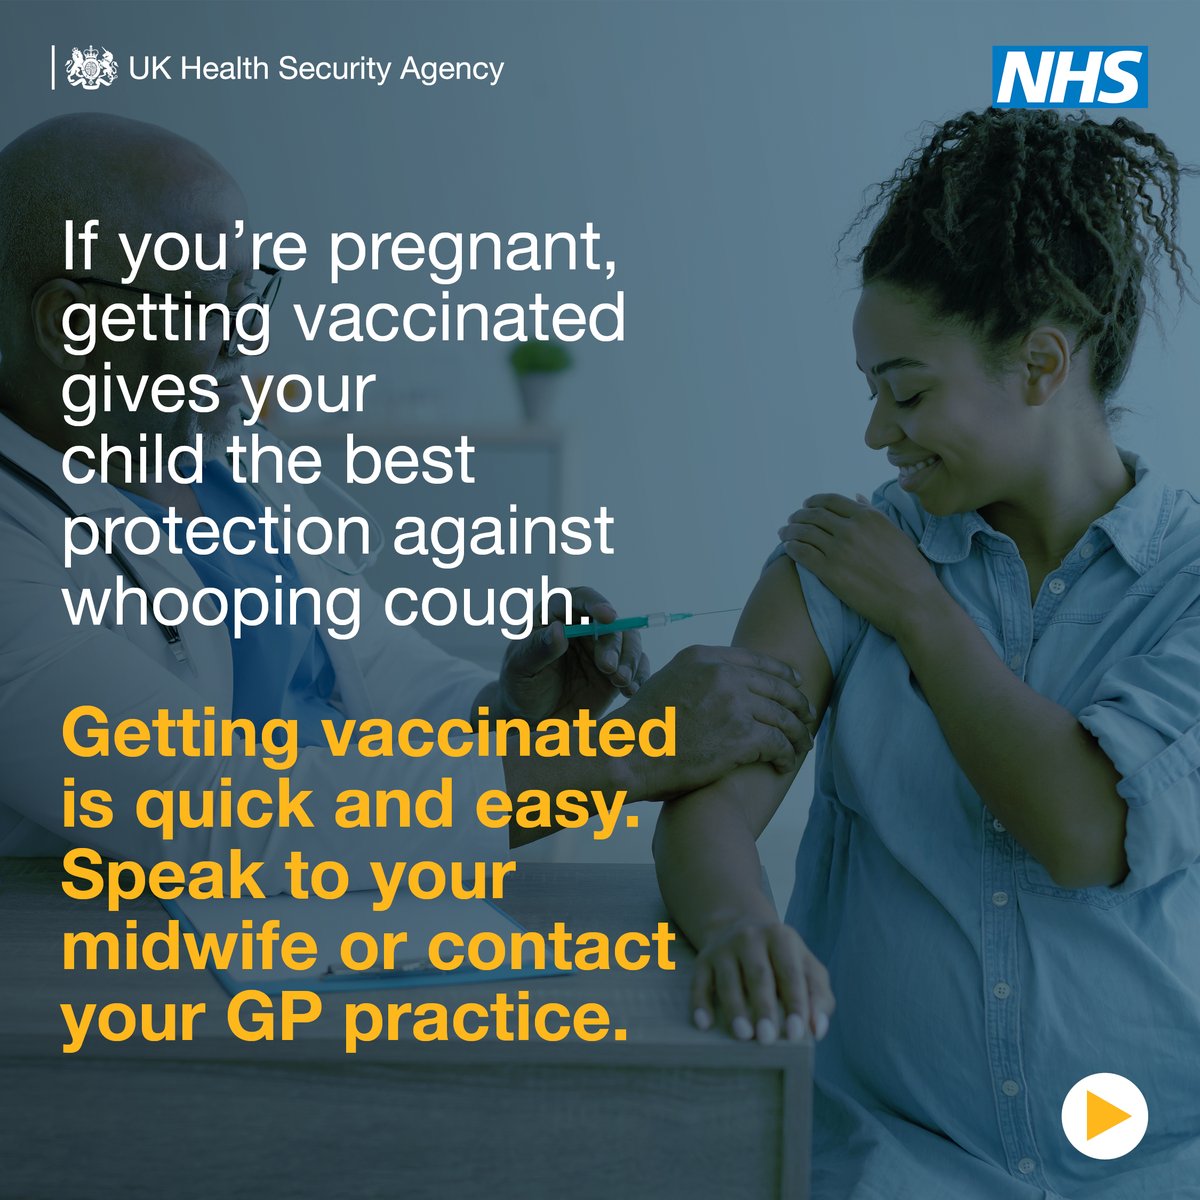 If you're pregnant, it's important to take up the #Pertussis vaccine when offered🤰 It helps to protect your baby in their first few weeks of life, as #WhoopingCough can be life-threatening and require hospital treatment. Find out more 👉 orlo.uk/m9VLa